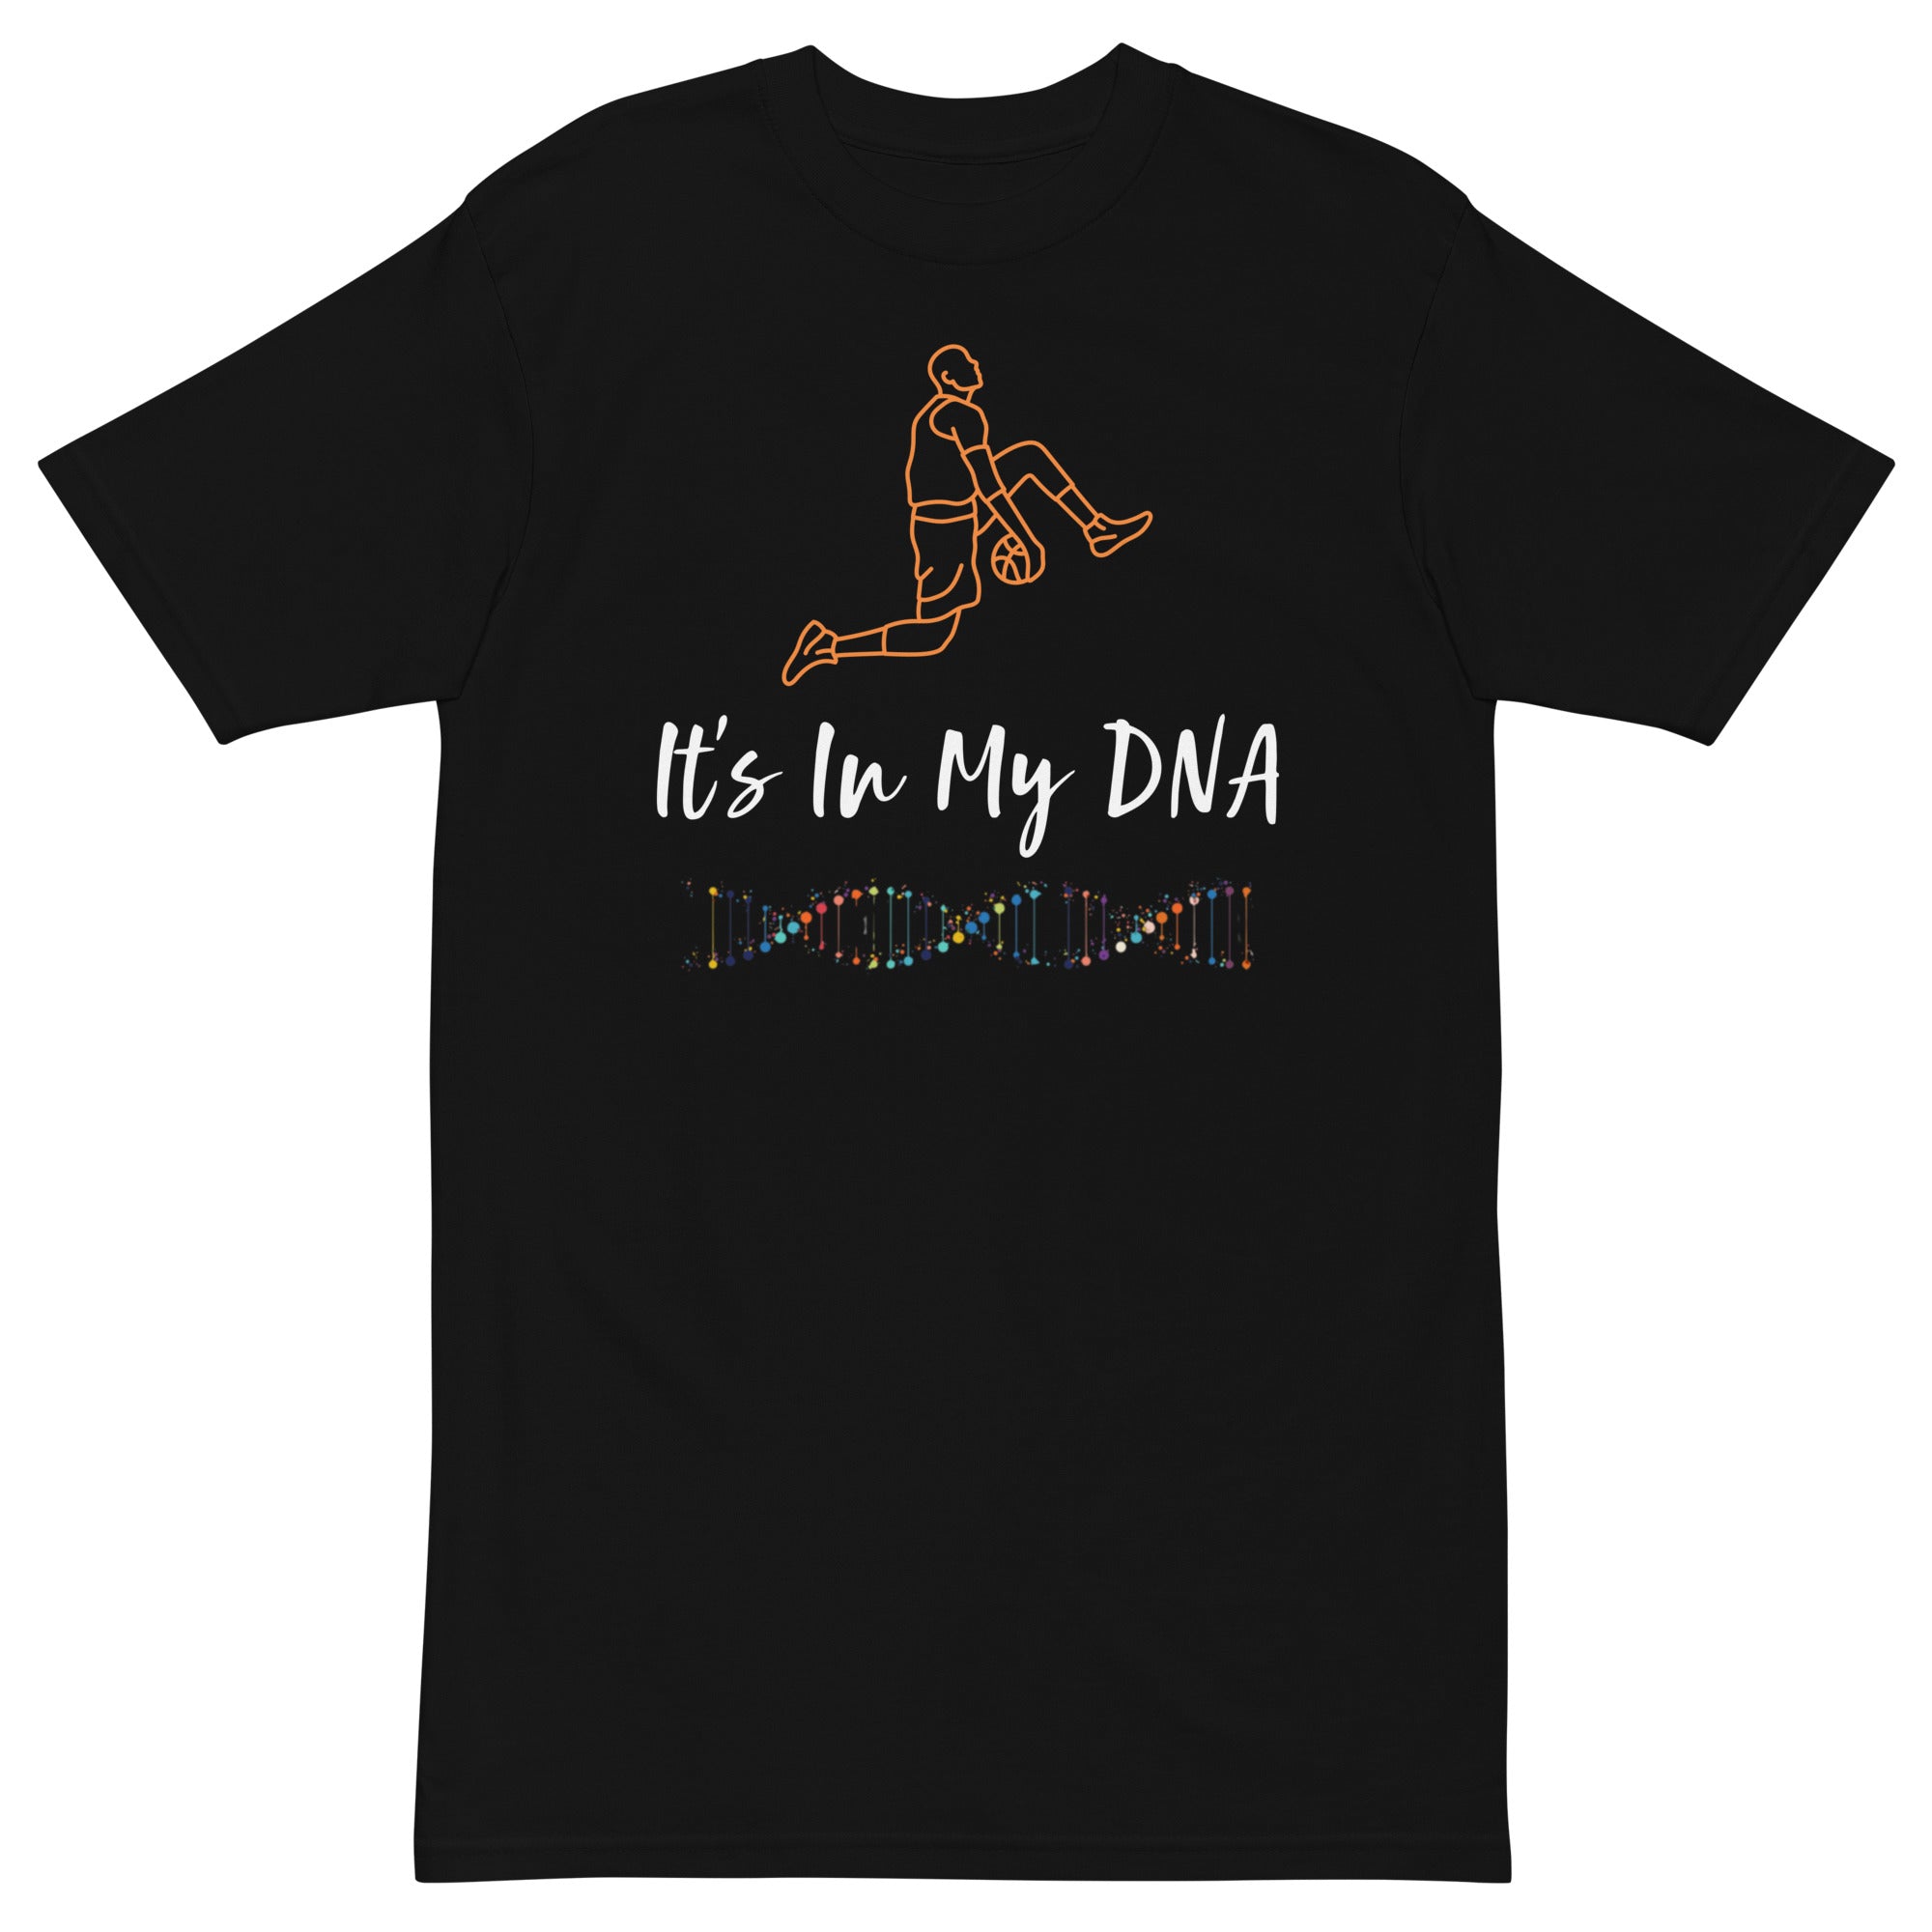 Unisex "It's In My DNA" Basketball Tee